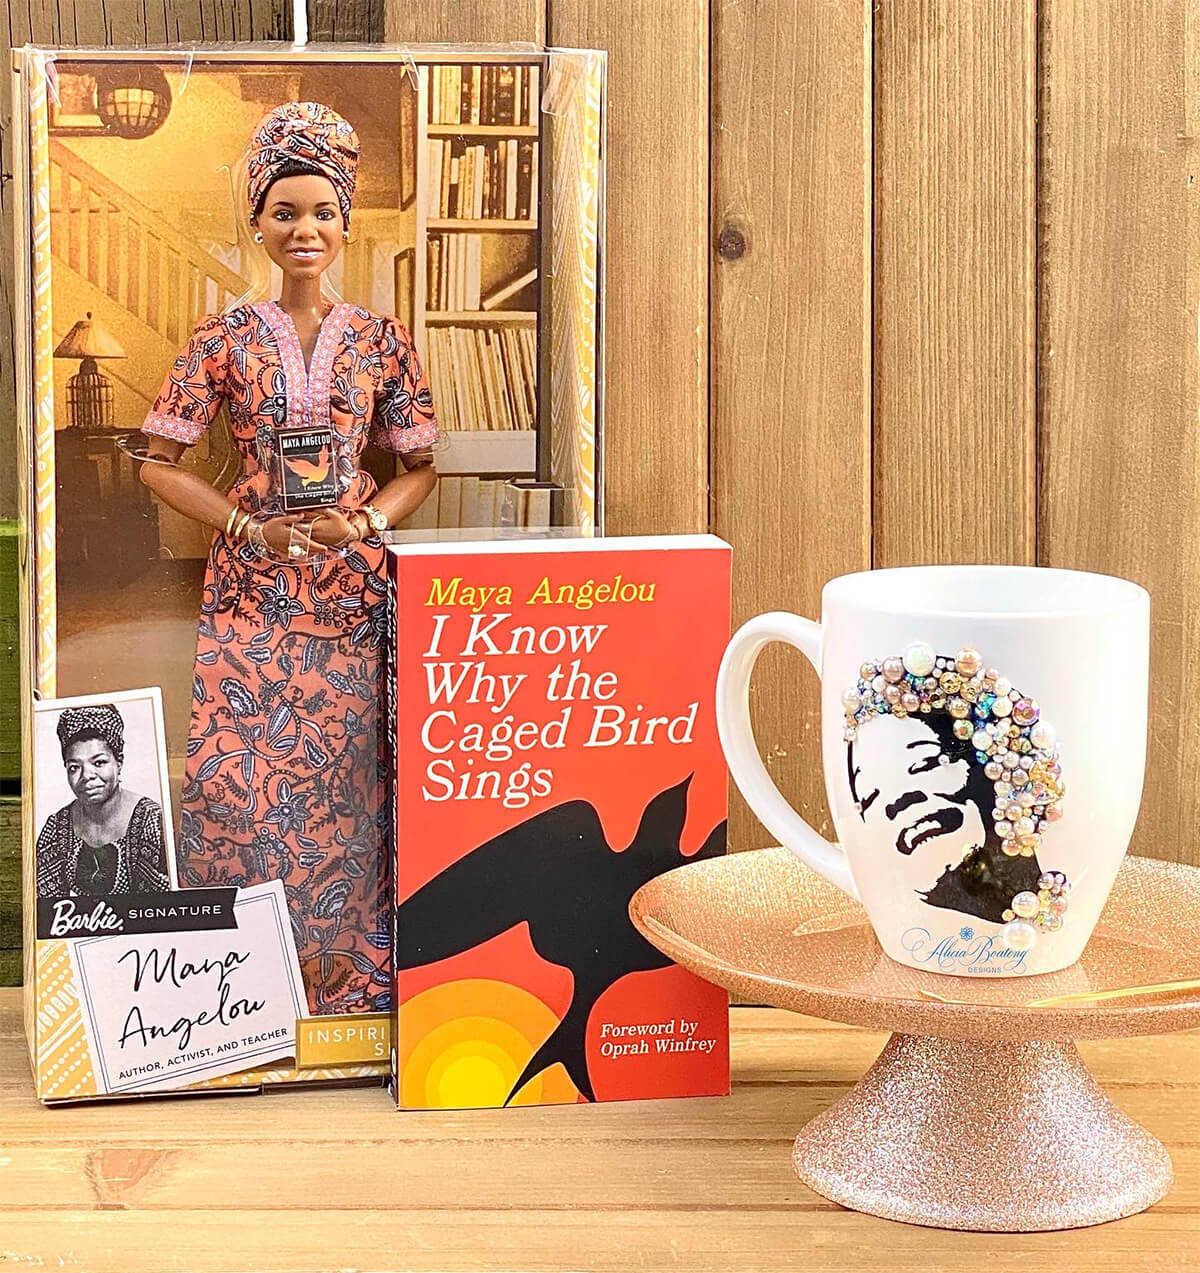 Mug by Alicia Boateng Designs. This coffee mug features the likeness of Maya Angelou accentuated with gems and beads.